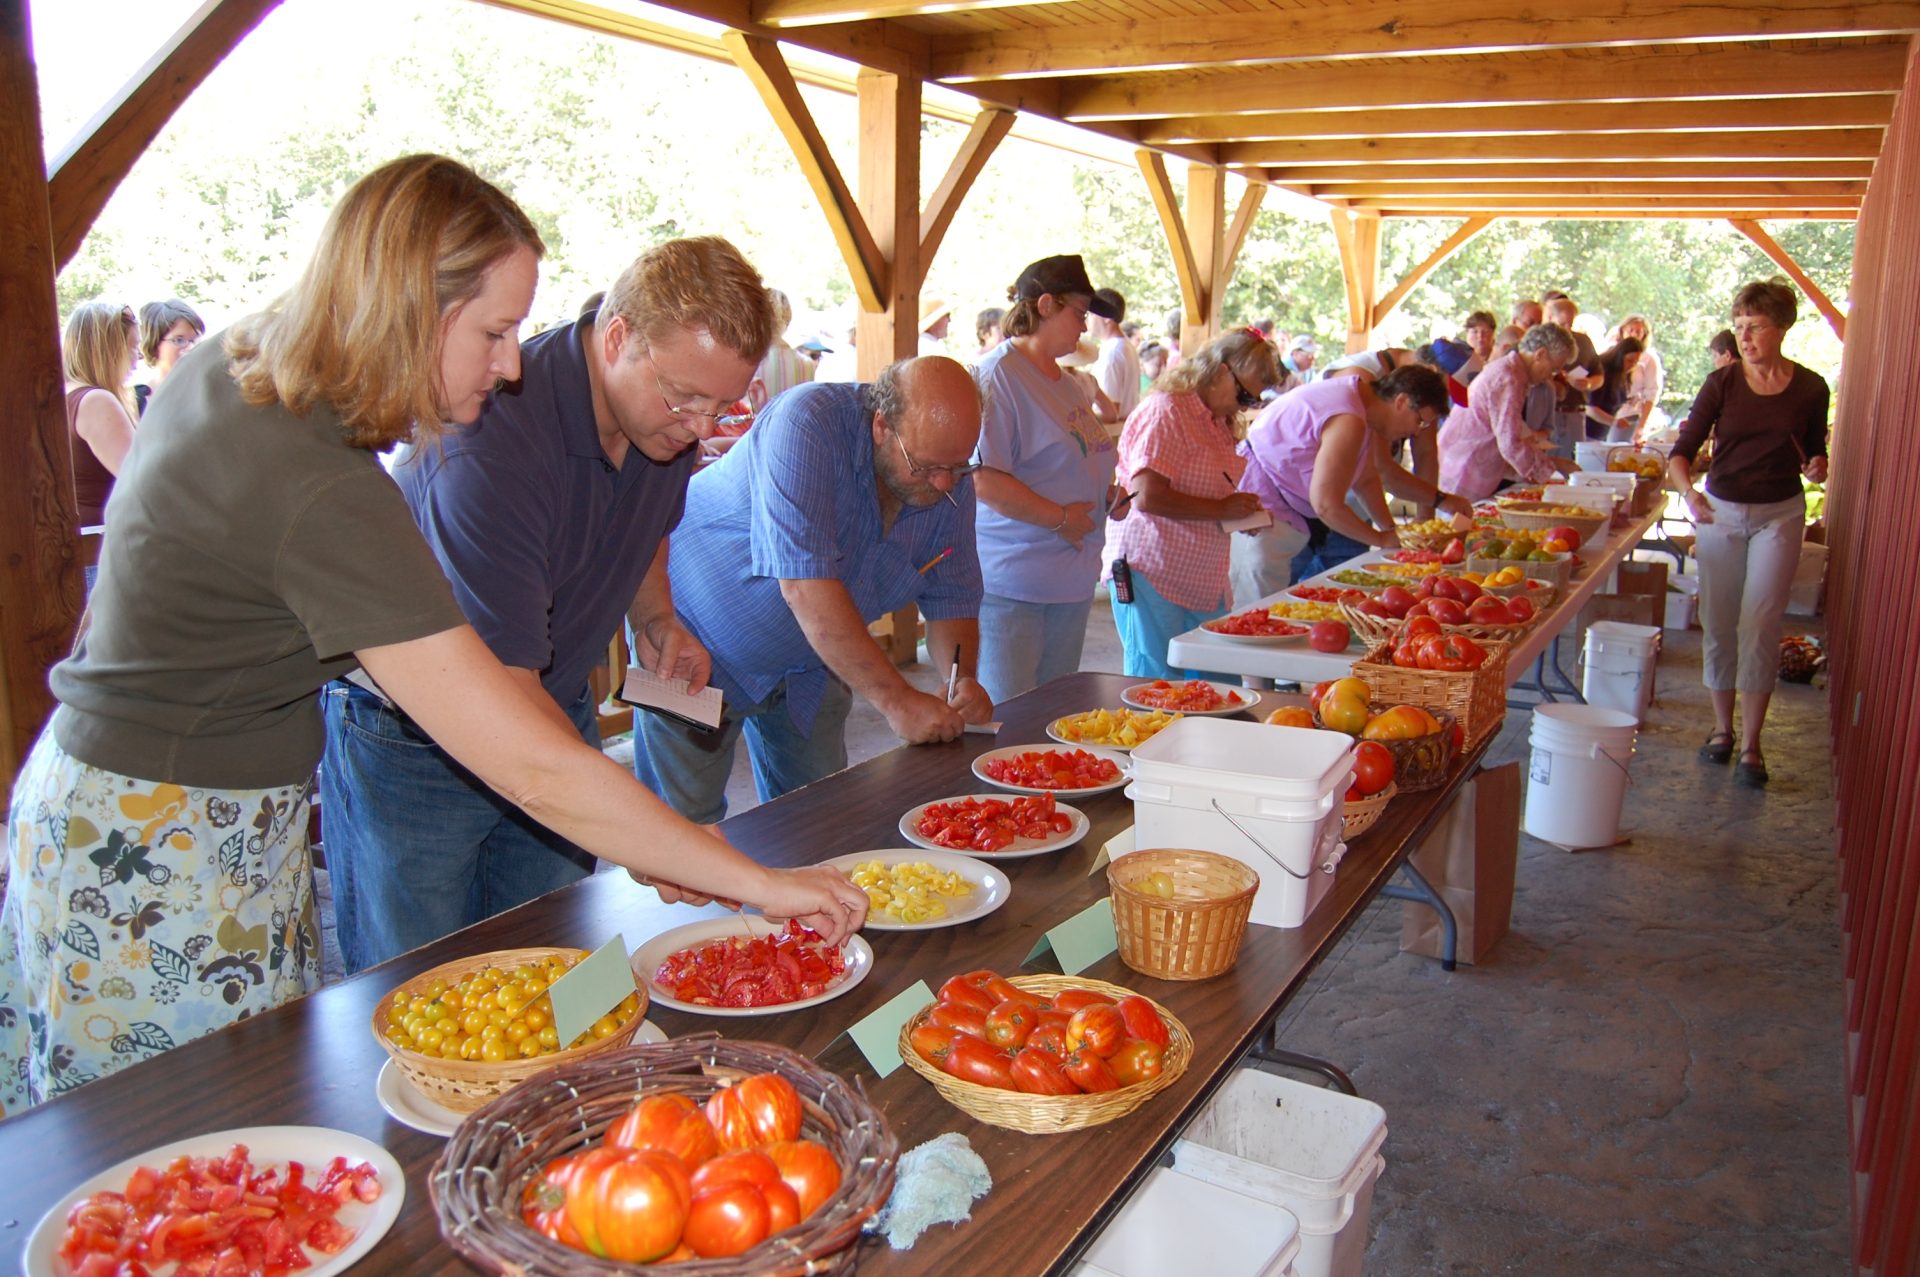 tomato tasting at Seed Savers brings thousands to Decorah each September